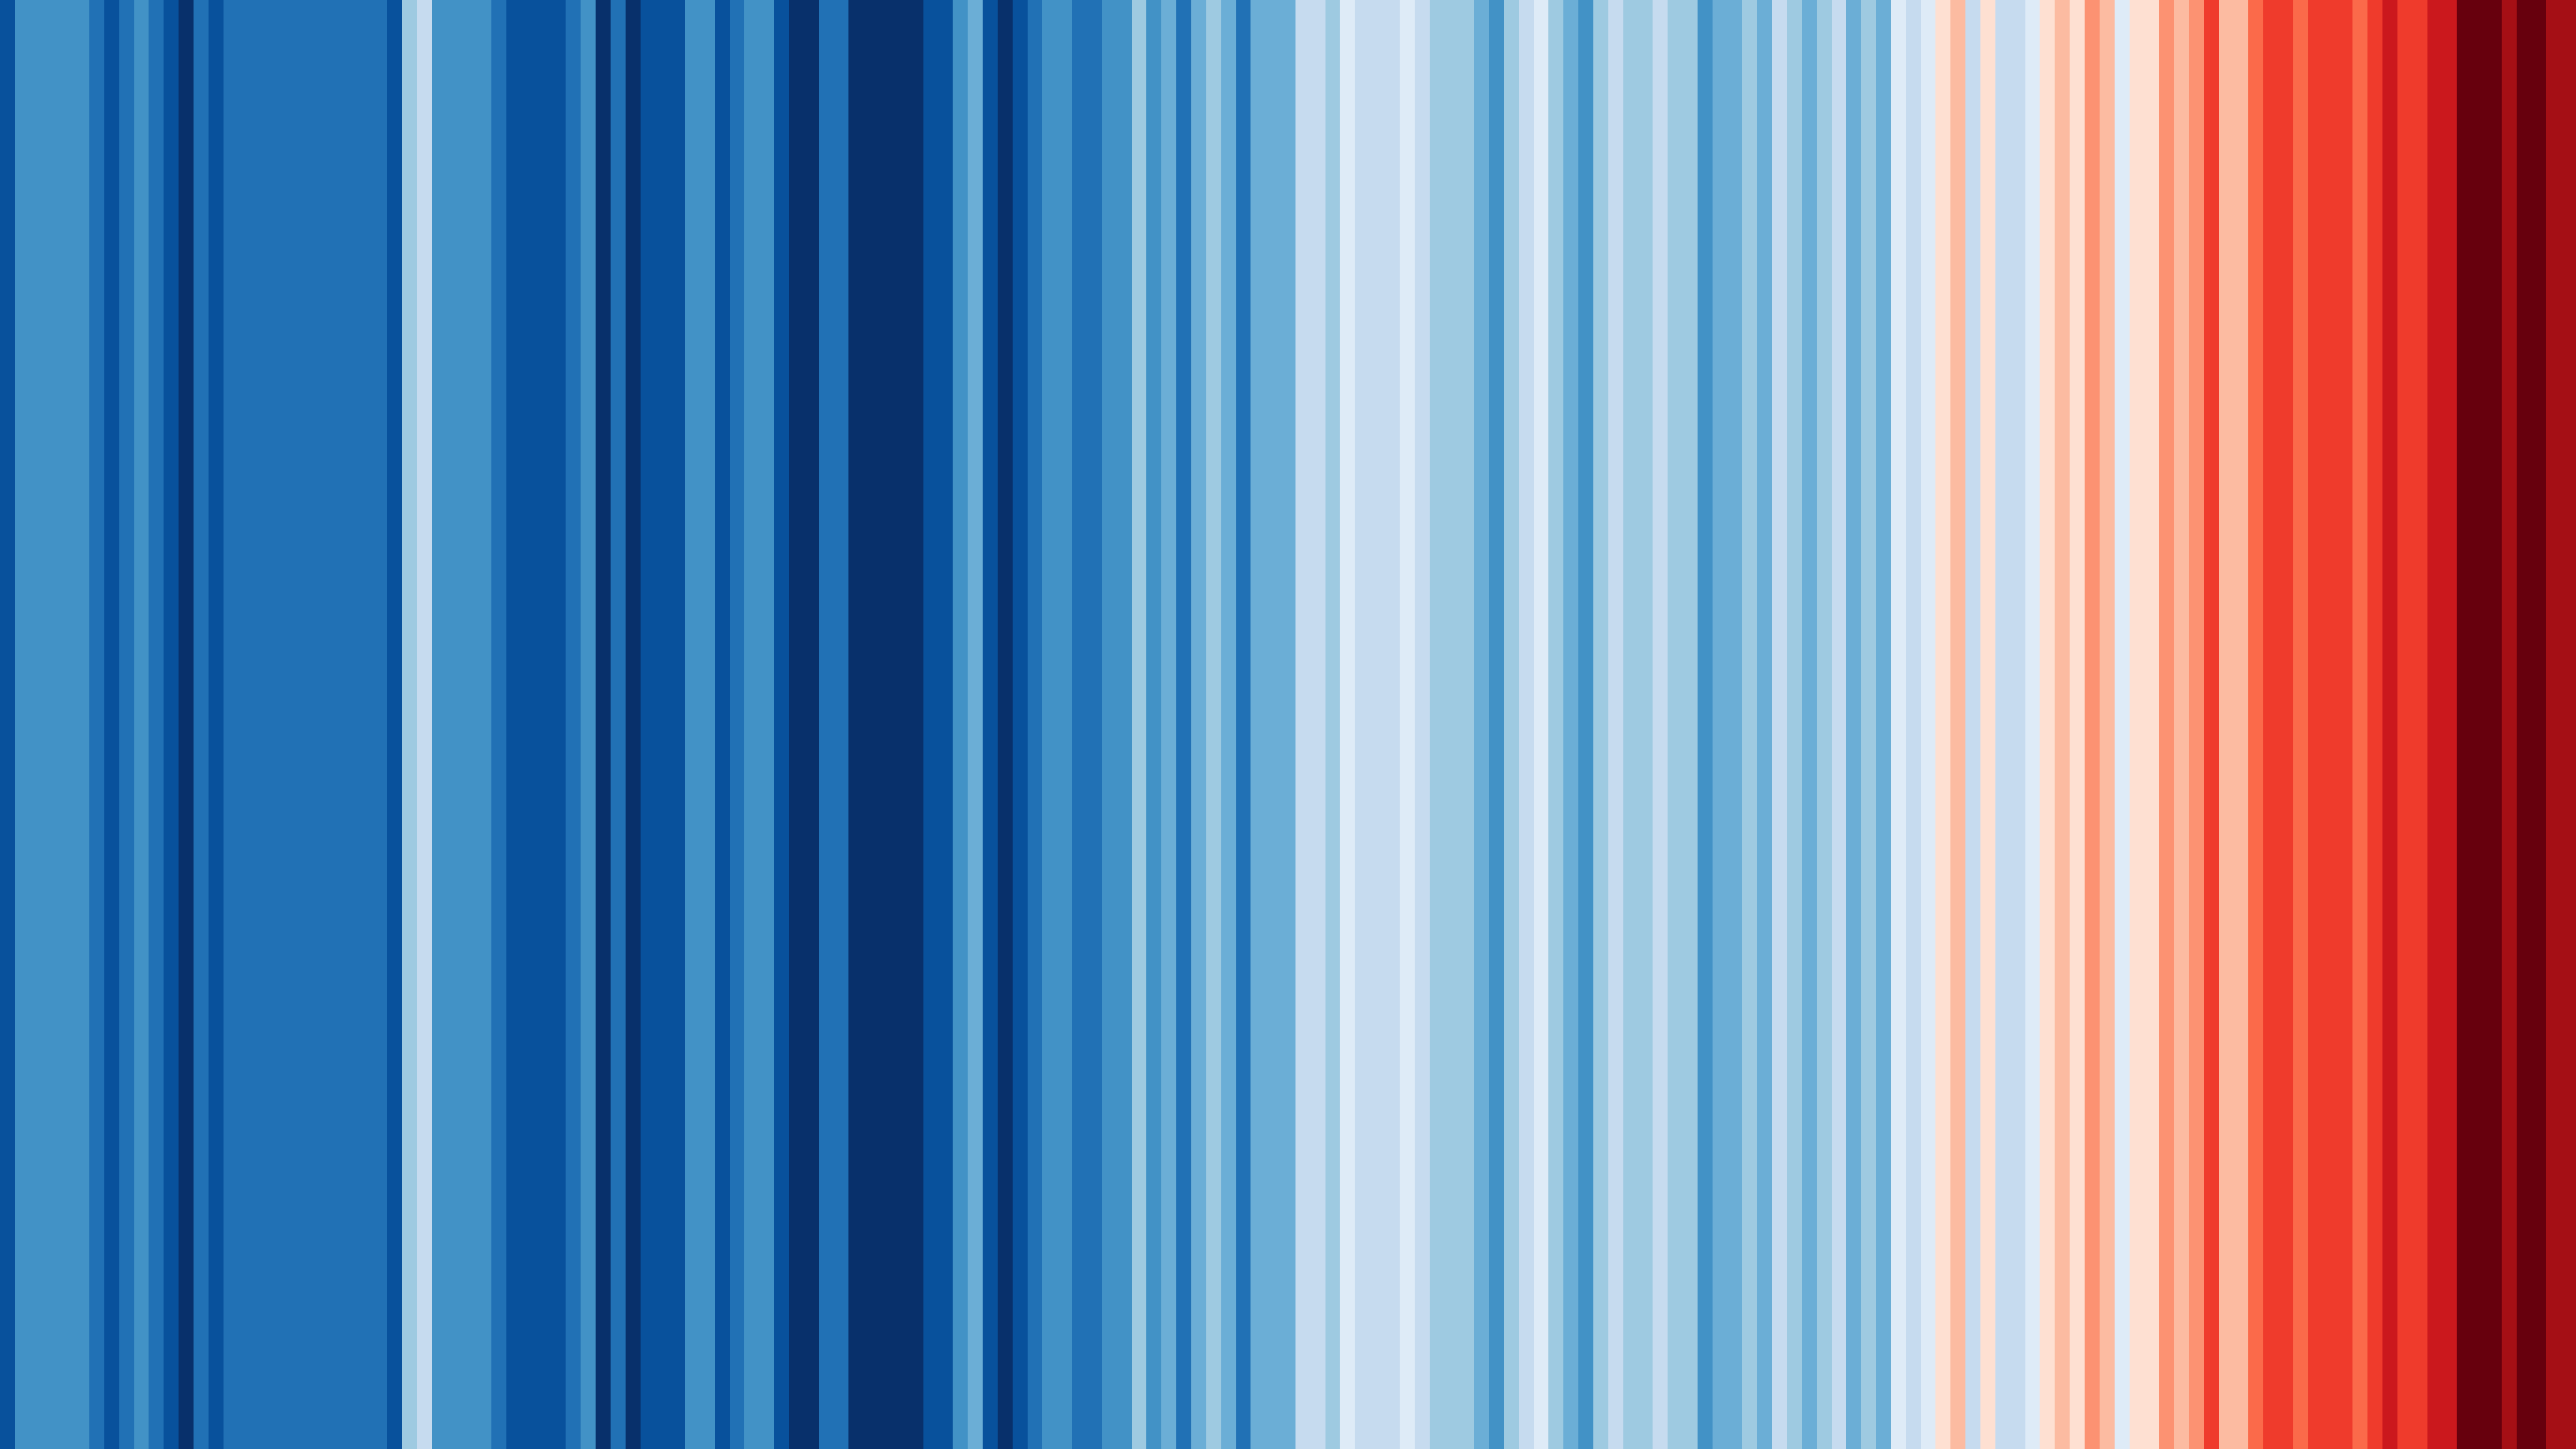 The climate stripes, showing the change in global average temperatures over two centuries.